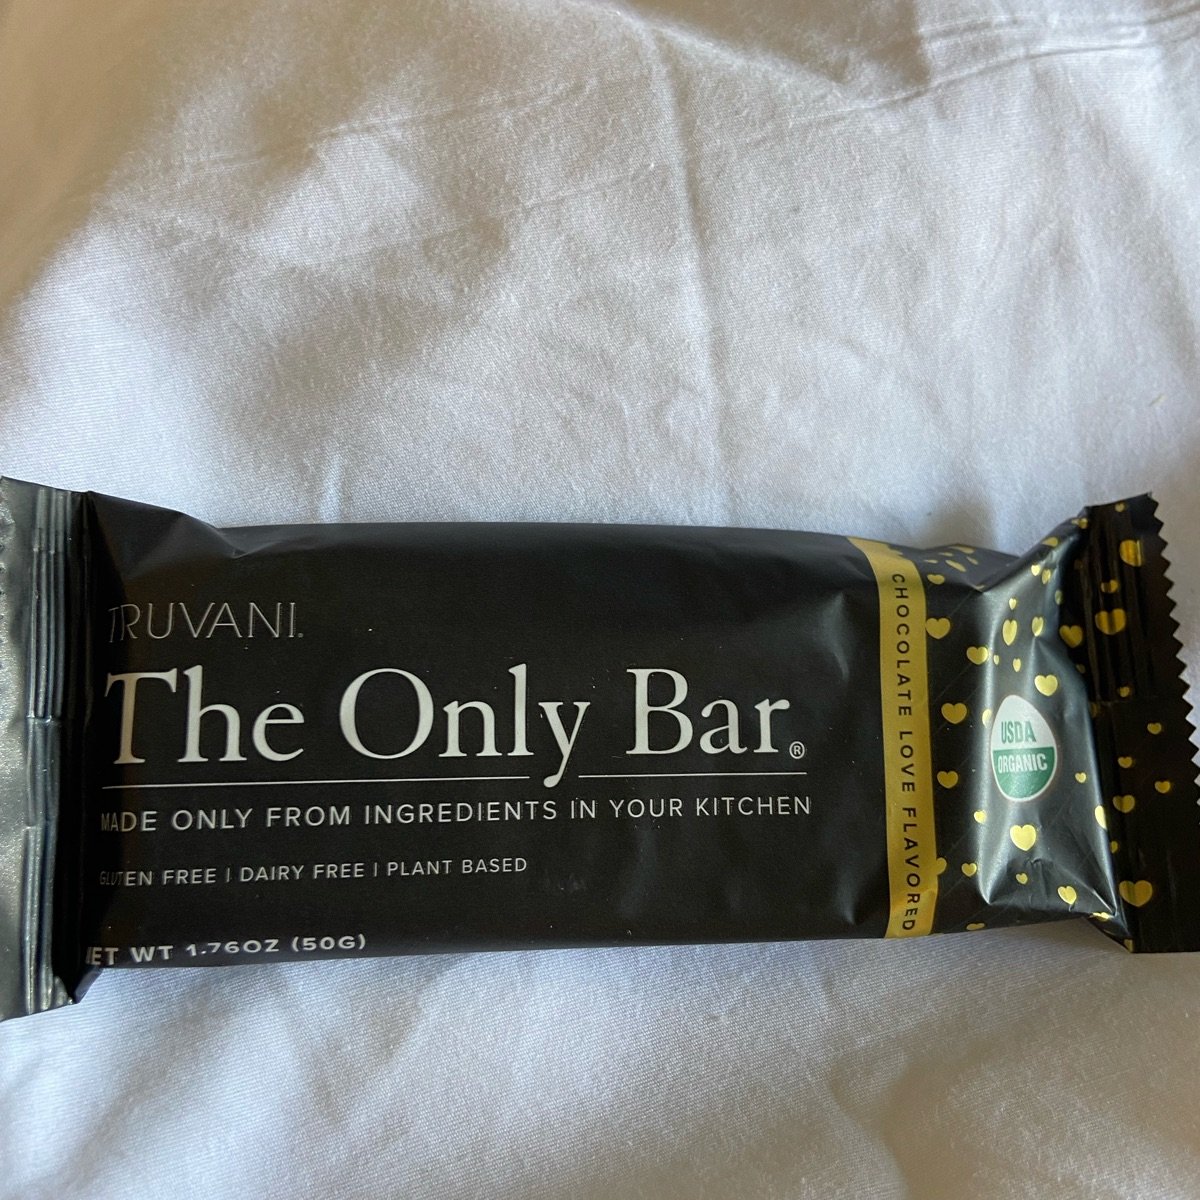 The only bar truvani The only bar Reviews | abillion